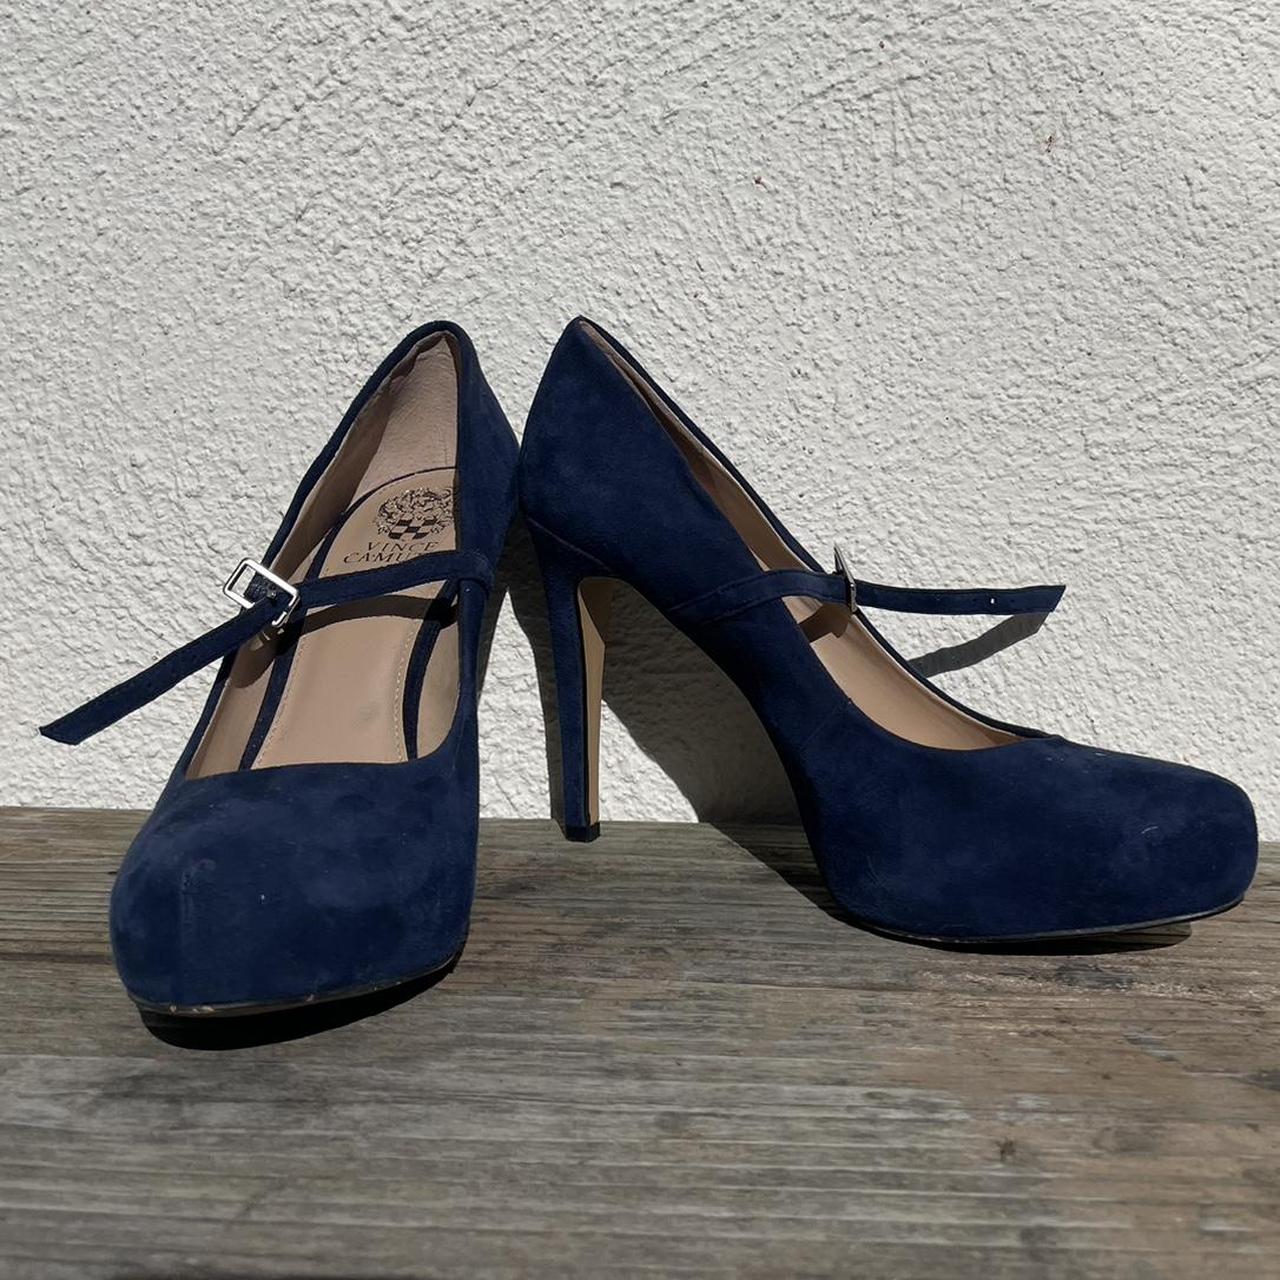 Vince Camuto Women's Navy Courts